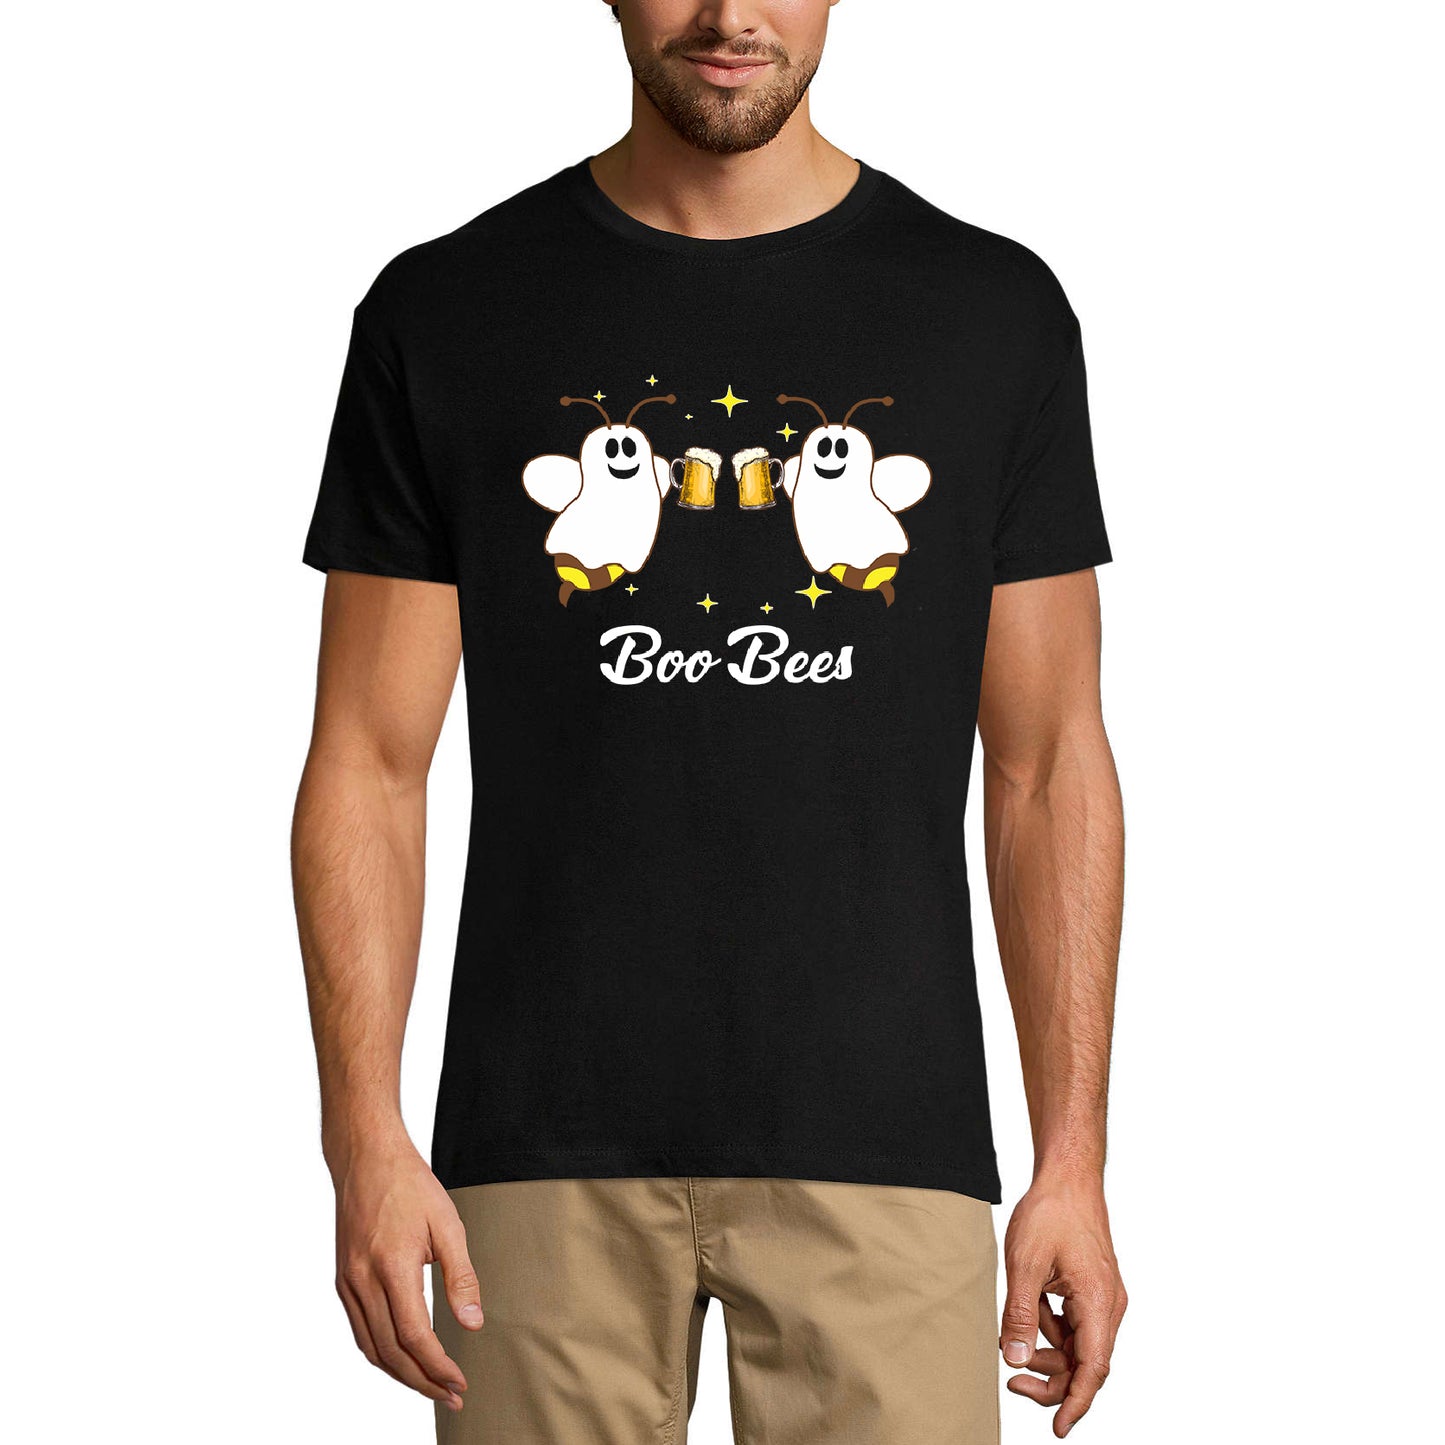 ULTRABASIC Men's Graphic T-Shirt Funny Boo Bees - Alcohol Beer Lover Tee Shirt